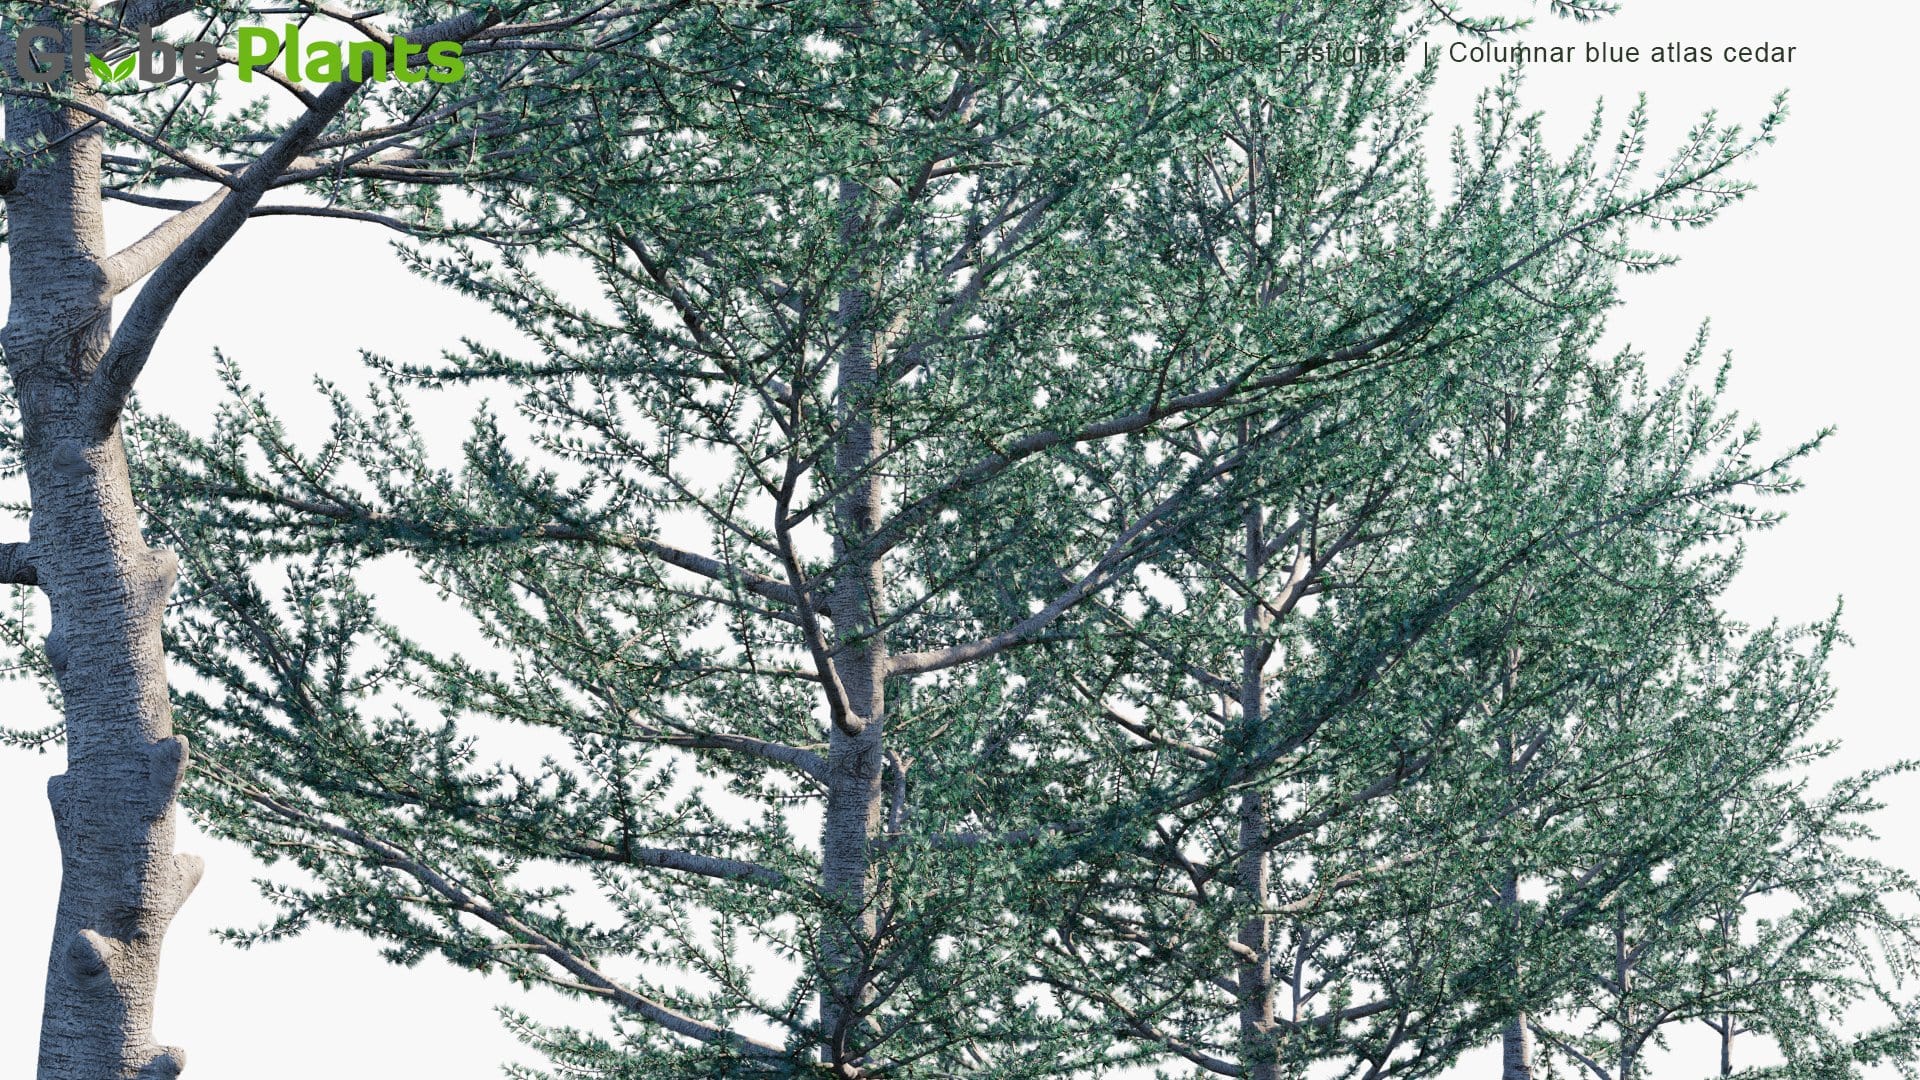 Pine Branches - download free texture atlases and decals